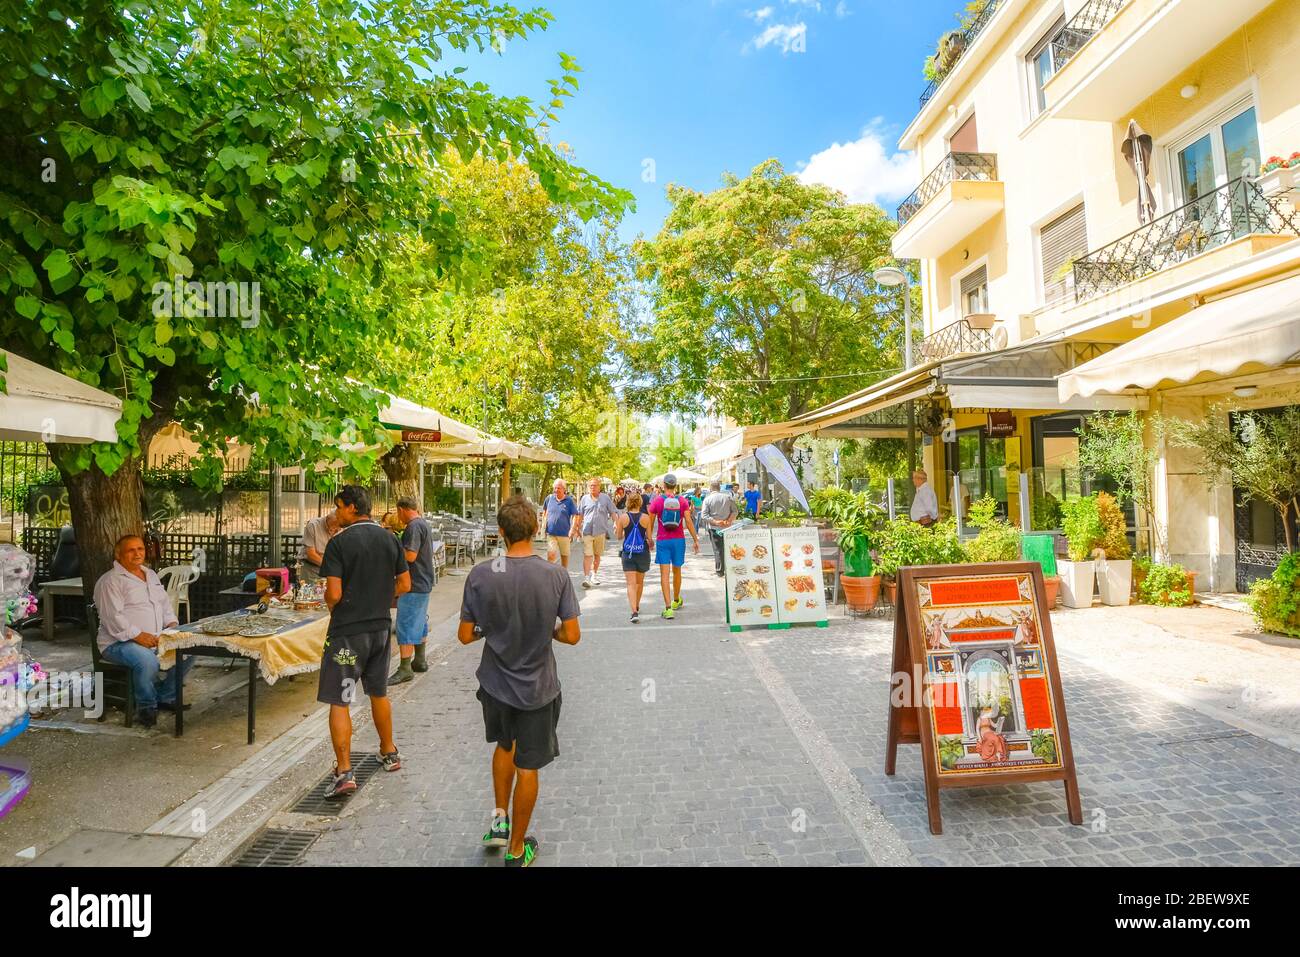 Tourists walk the crowded path past cafes, street vendors and souvenir shops in the Plaka district of Athens, Greece on a summer day Stock Photo